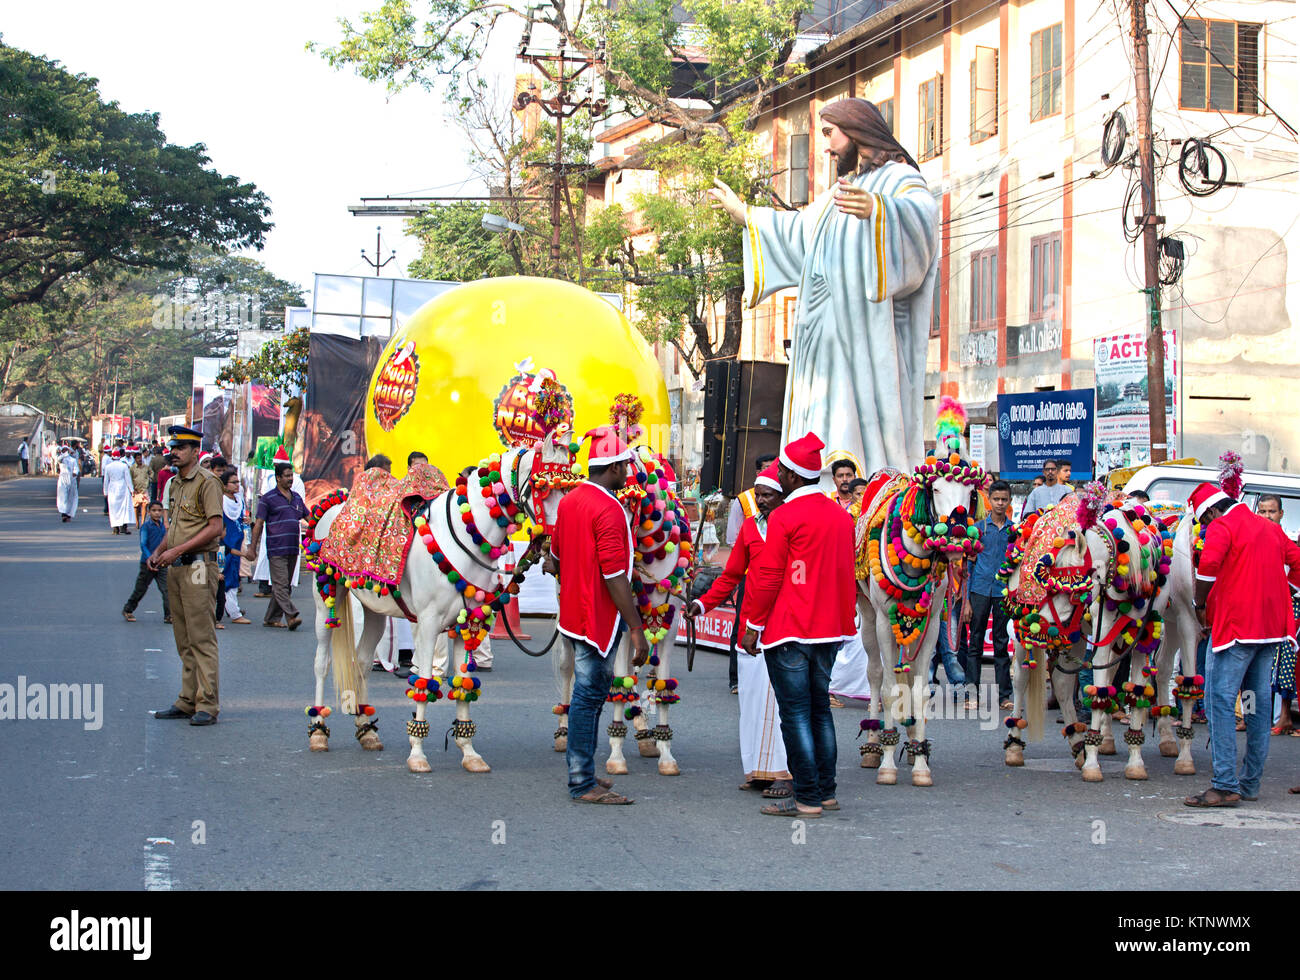 Buon Natale 2020 Trichur.Trichur Thrissur High Resolution Stock Photography And Images Alamy